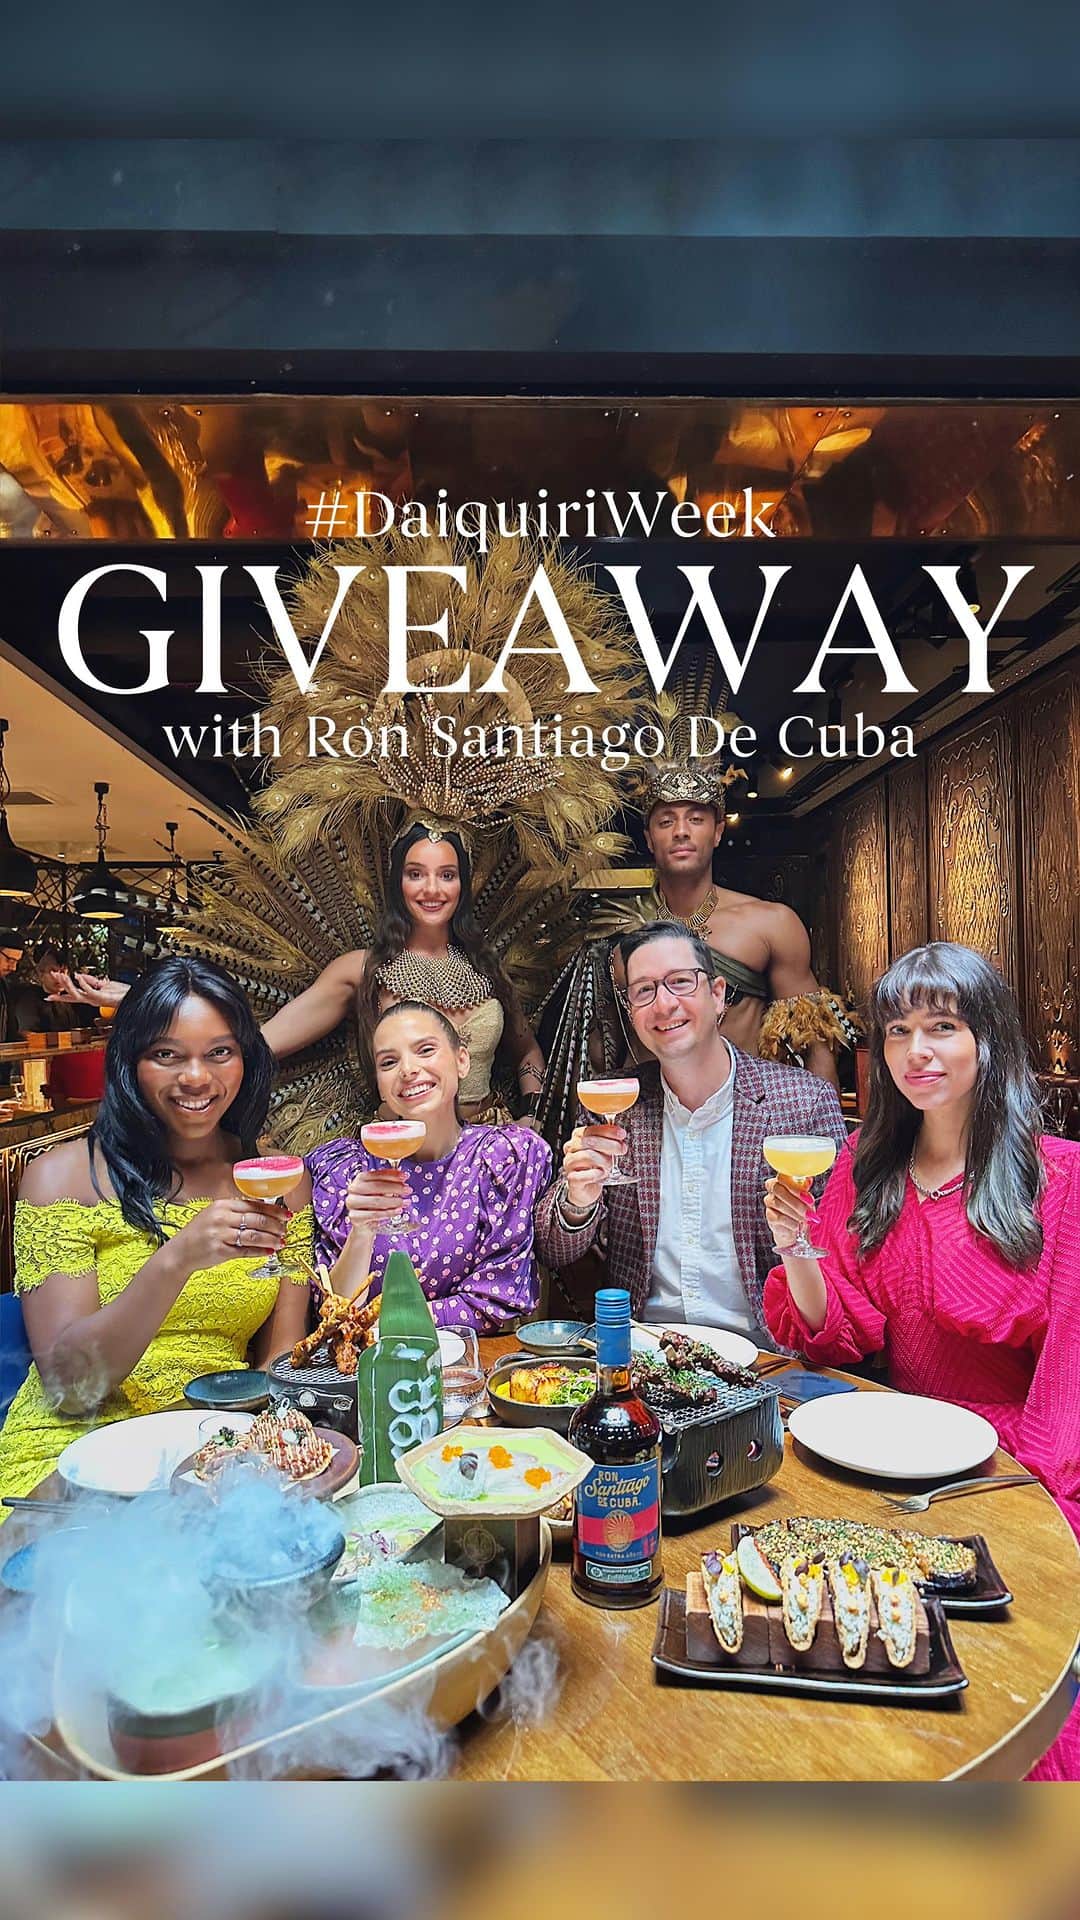 @LONDON | TAG #THISISLONDONのインスタグラム：「ad🍹#GIVEAWAY NOW CLOSED ! Celebrate #DaiquiriWeek in style with @RonSantiagoDeCuba and @LONDON! Get ready to experience the taste, soul, and rhythm of #SantiagoDeCuba in London like never before! 🥳   The prize is an unforgettable evening at the iconic restaurant and bar @CoyaMayfair, where you and THREE friends 😱 can enjoy bespoke #RonSantiagoDeCuba daiquiris 🍹 and soak up the vibrant atmosphere! 💃🏽 But that’s not all – you’ll also take home a bespoke Ron Santiago De Cuba suitcase and the full range of four premium rums, so you can enjoy the taste of El Oriente de Cuba with your friends! 🙌🏼   ▶️ TO ENTER the Competition (18+):   1. FOLLOW @RonSantiagodeCuba.  2. LIKE the competition post. 3. TAG three friends that you will be taking on the Ron Santiago De Cuba experience with them.   PRIZE - The Lucky Winner will receive:    1. A bespoke and branded Ron Santiago De Cuba suitcase which includes a bottle of the 11 Years Old Extra Añejo Cuban rum, with tumbler glasses to prepare your cocktails in. 2. The other three bottles from the Ron Santiago de Cuba range: the 8 Years Old, 12 Years Old and Carta Blanca. 3. A Ron Santiago De Cuba experience at the iconic Coya with 3 friends   Full T&Cs on @ronsantiagodecuba bio. // GOOD LUCK! @MrLondon & @Alice.Sampo ❤️🎉🥳  ___________________________________________  #thisislondon #lovelondon #london #londra #londonlife #londres #uk #visitlondon #british #🇬🇧 #foodiesoflondon #londonfoodies #londonfoodie #londonfood #londonrestaurants #londonbars #londonreviewed #mayfair #westminster #rumlovers #drinkresponsibly #competition #rumlover」